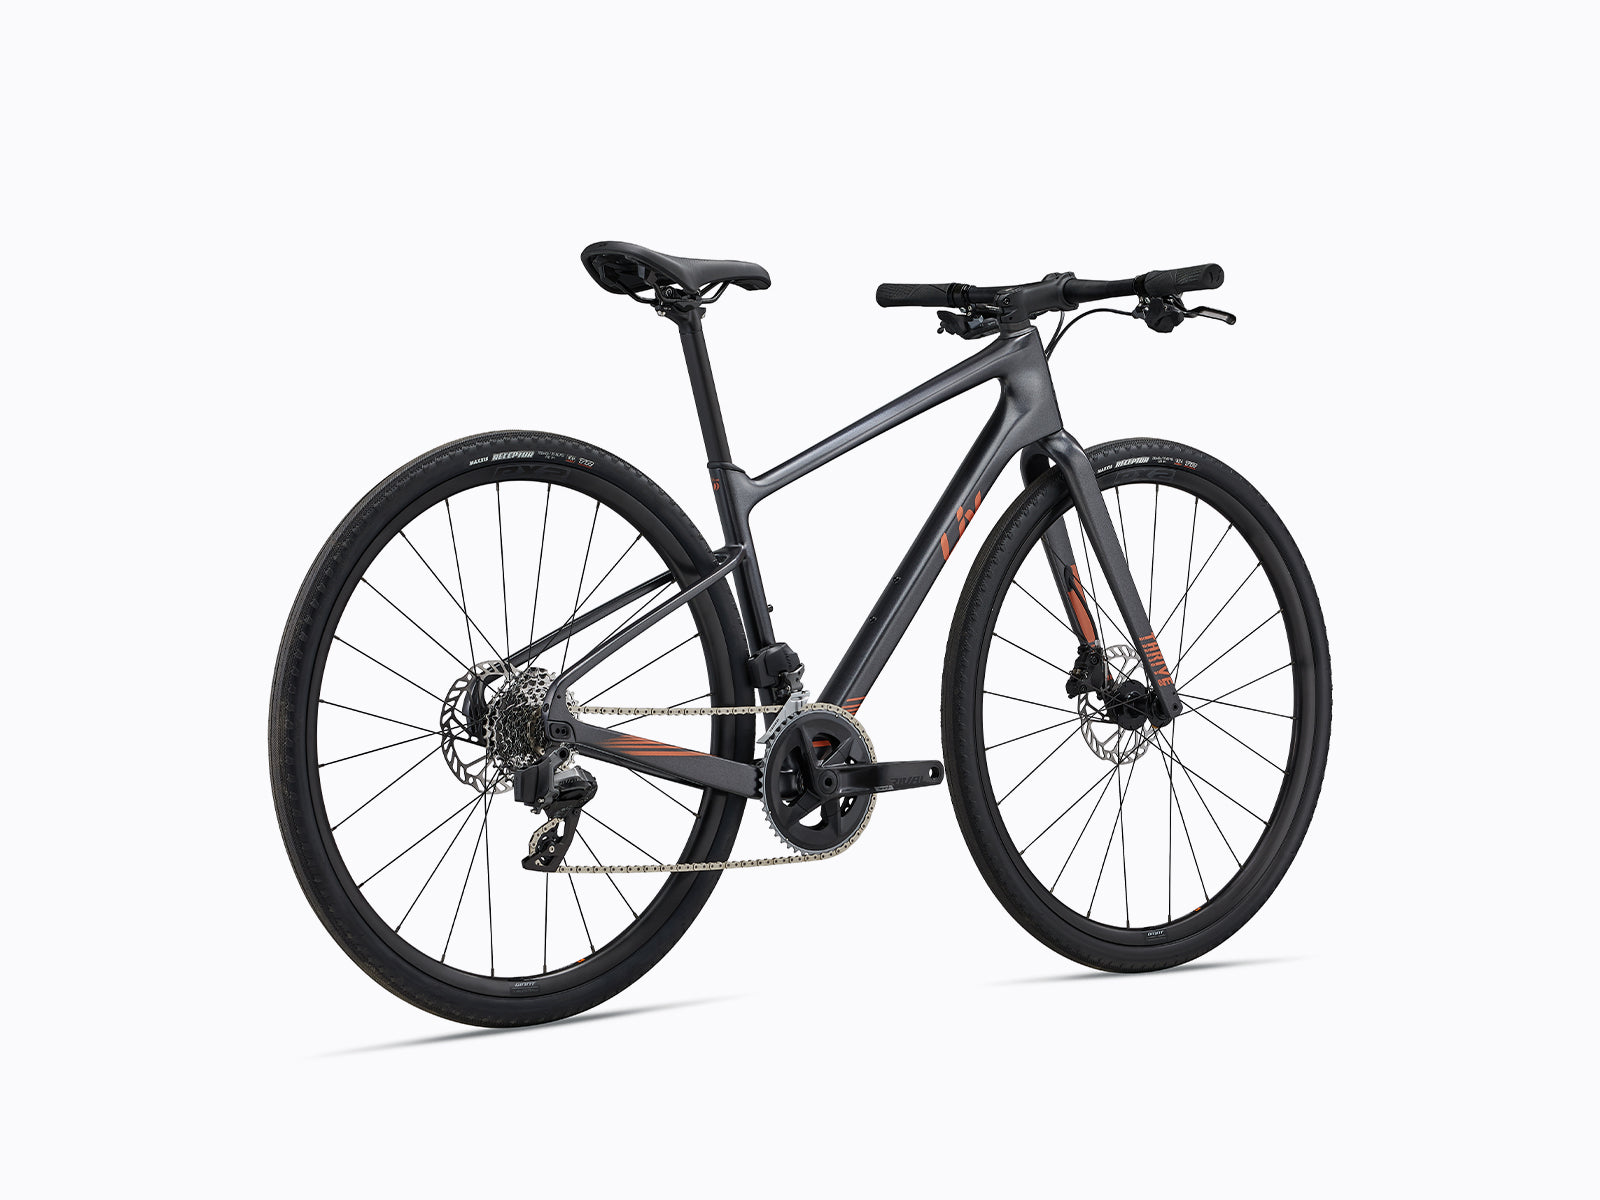 Image features the Liv thrive advanced 0 in black colour. Sold by Giant Melbourne, a bike shop in melbourne, australia